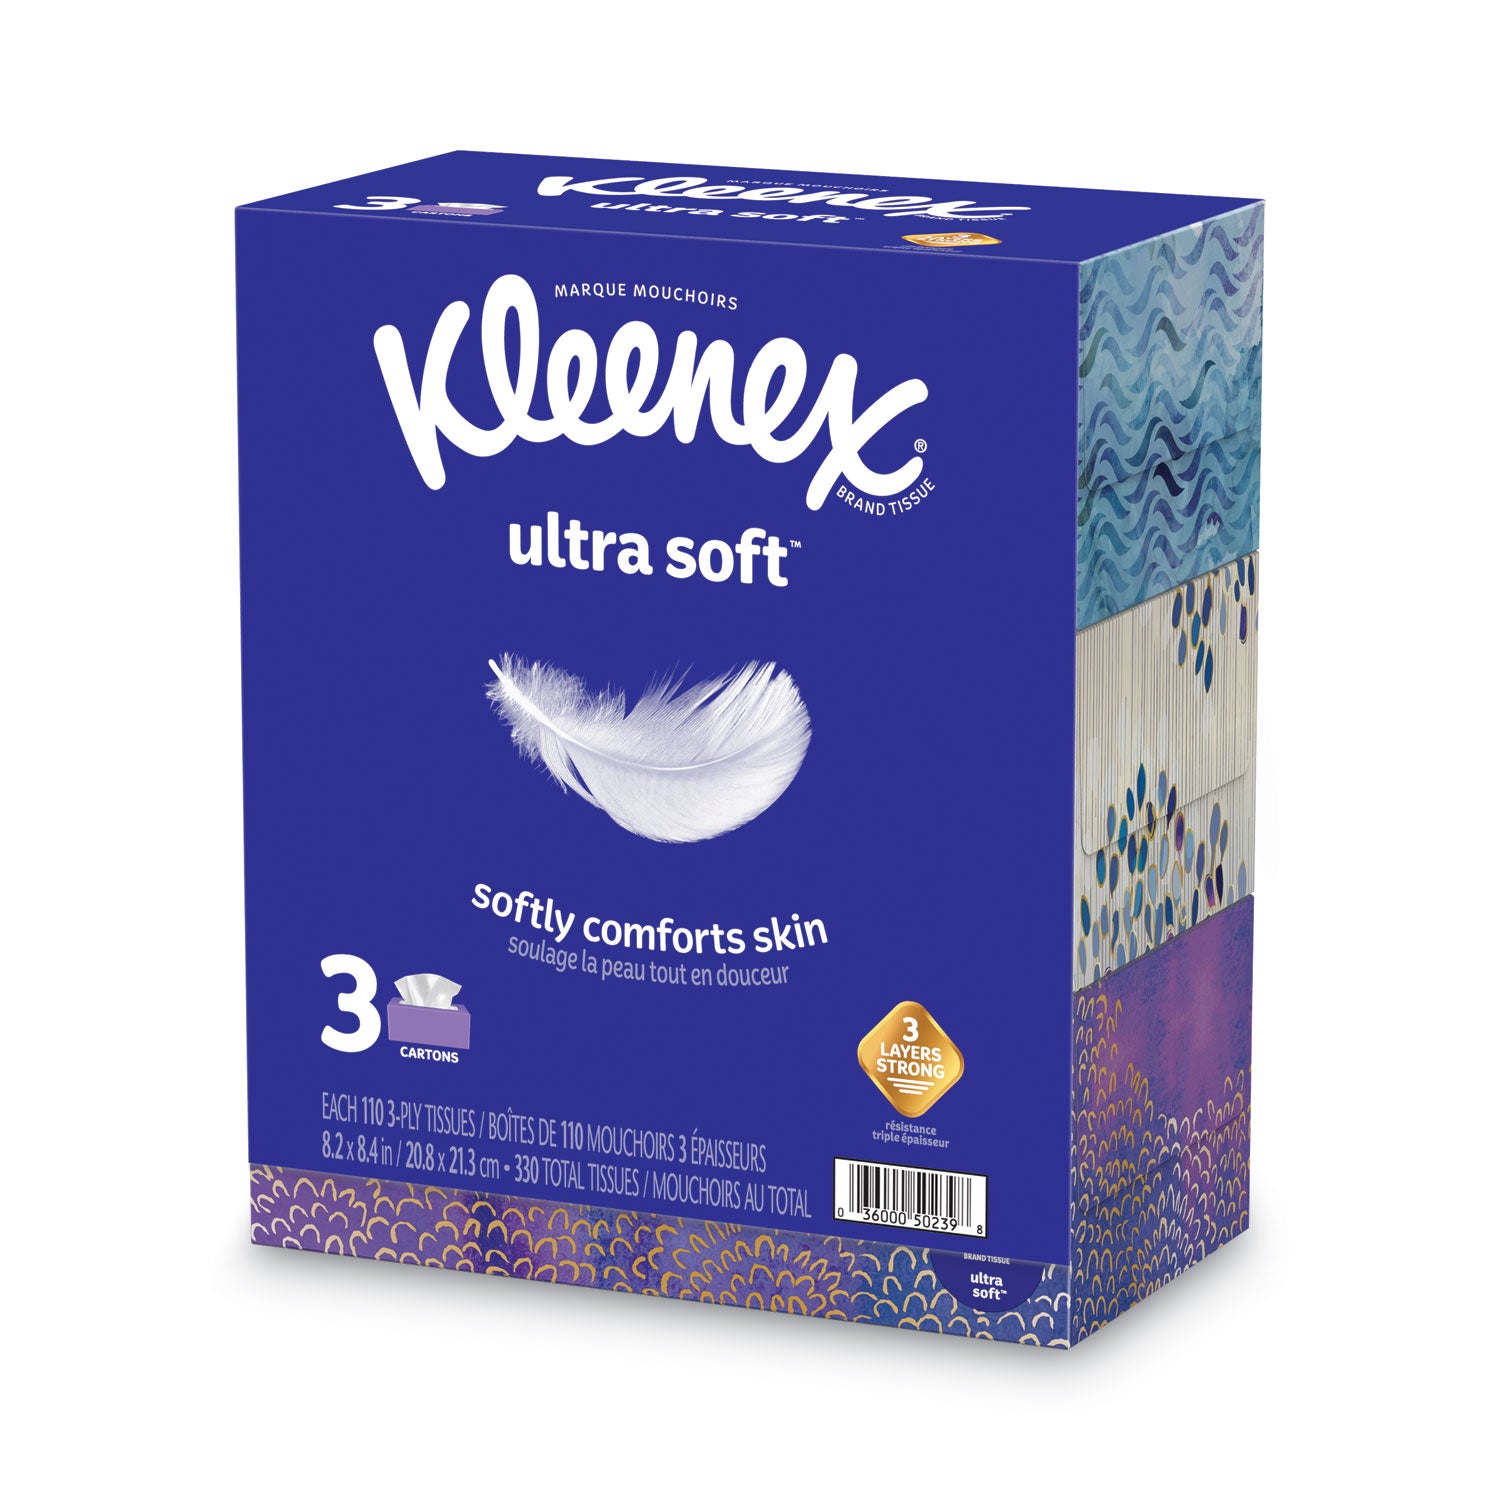 ultra-soft-facial-tissue-3-ply-white-110-sheets-box-3-boxes-pack_kcc50239 - 4